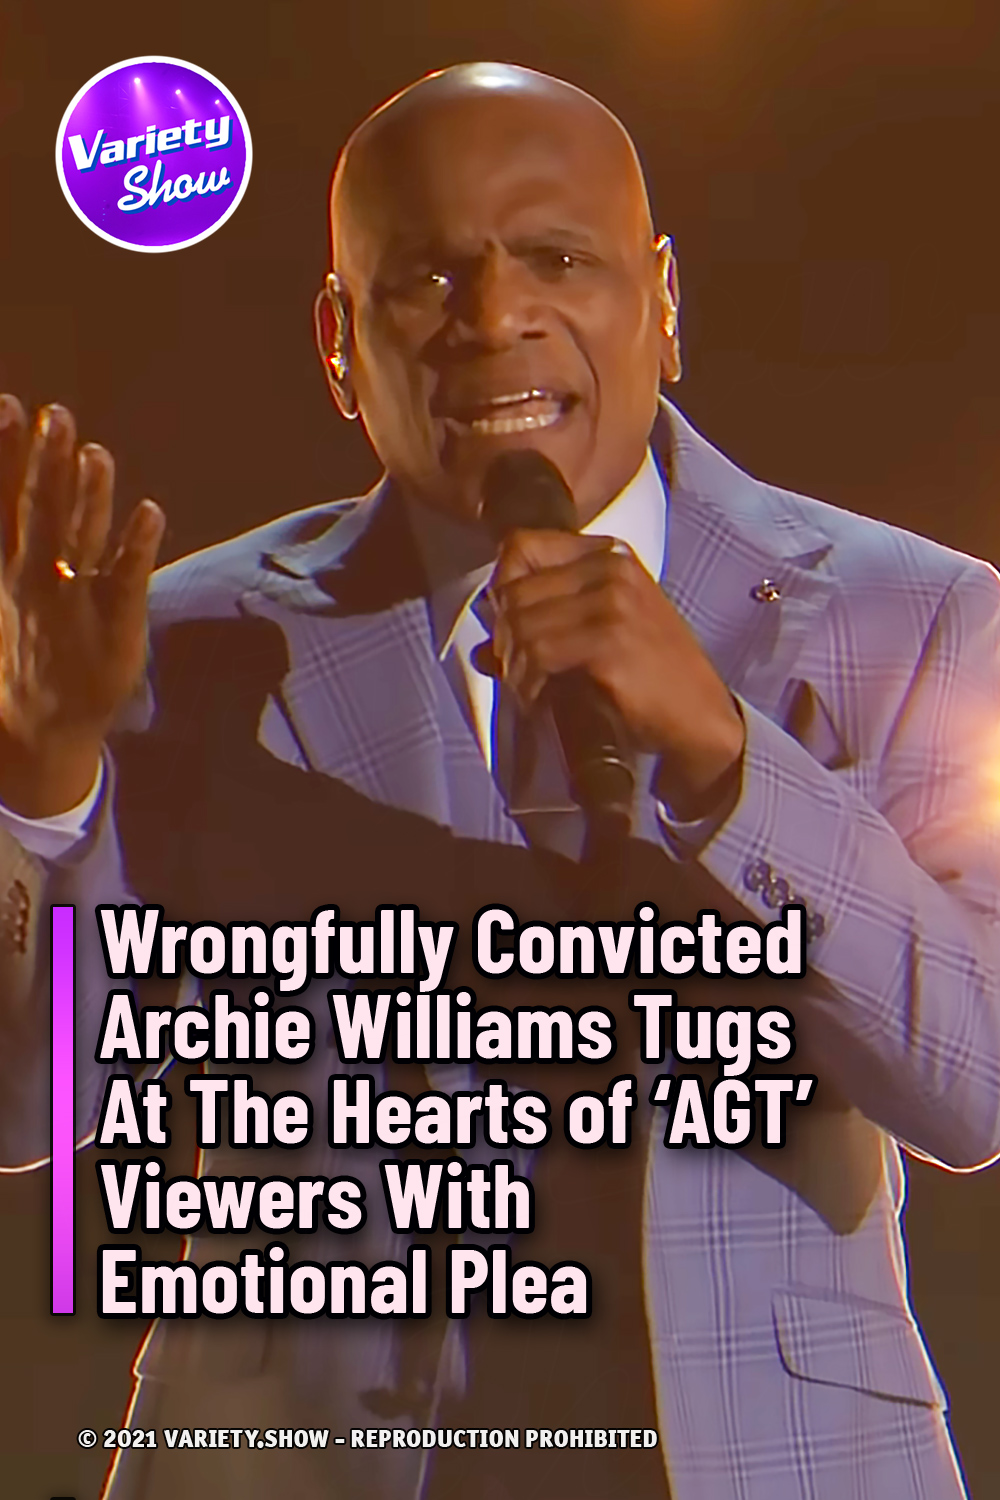 Wrongfully Convicted Archie Williams Tugs At The Hearts of ‘AGT’ Viewers With Emotional Plea